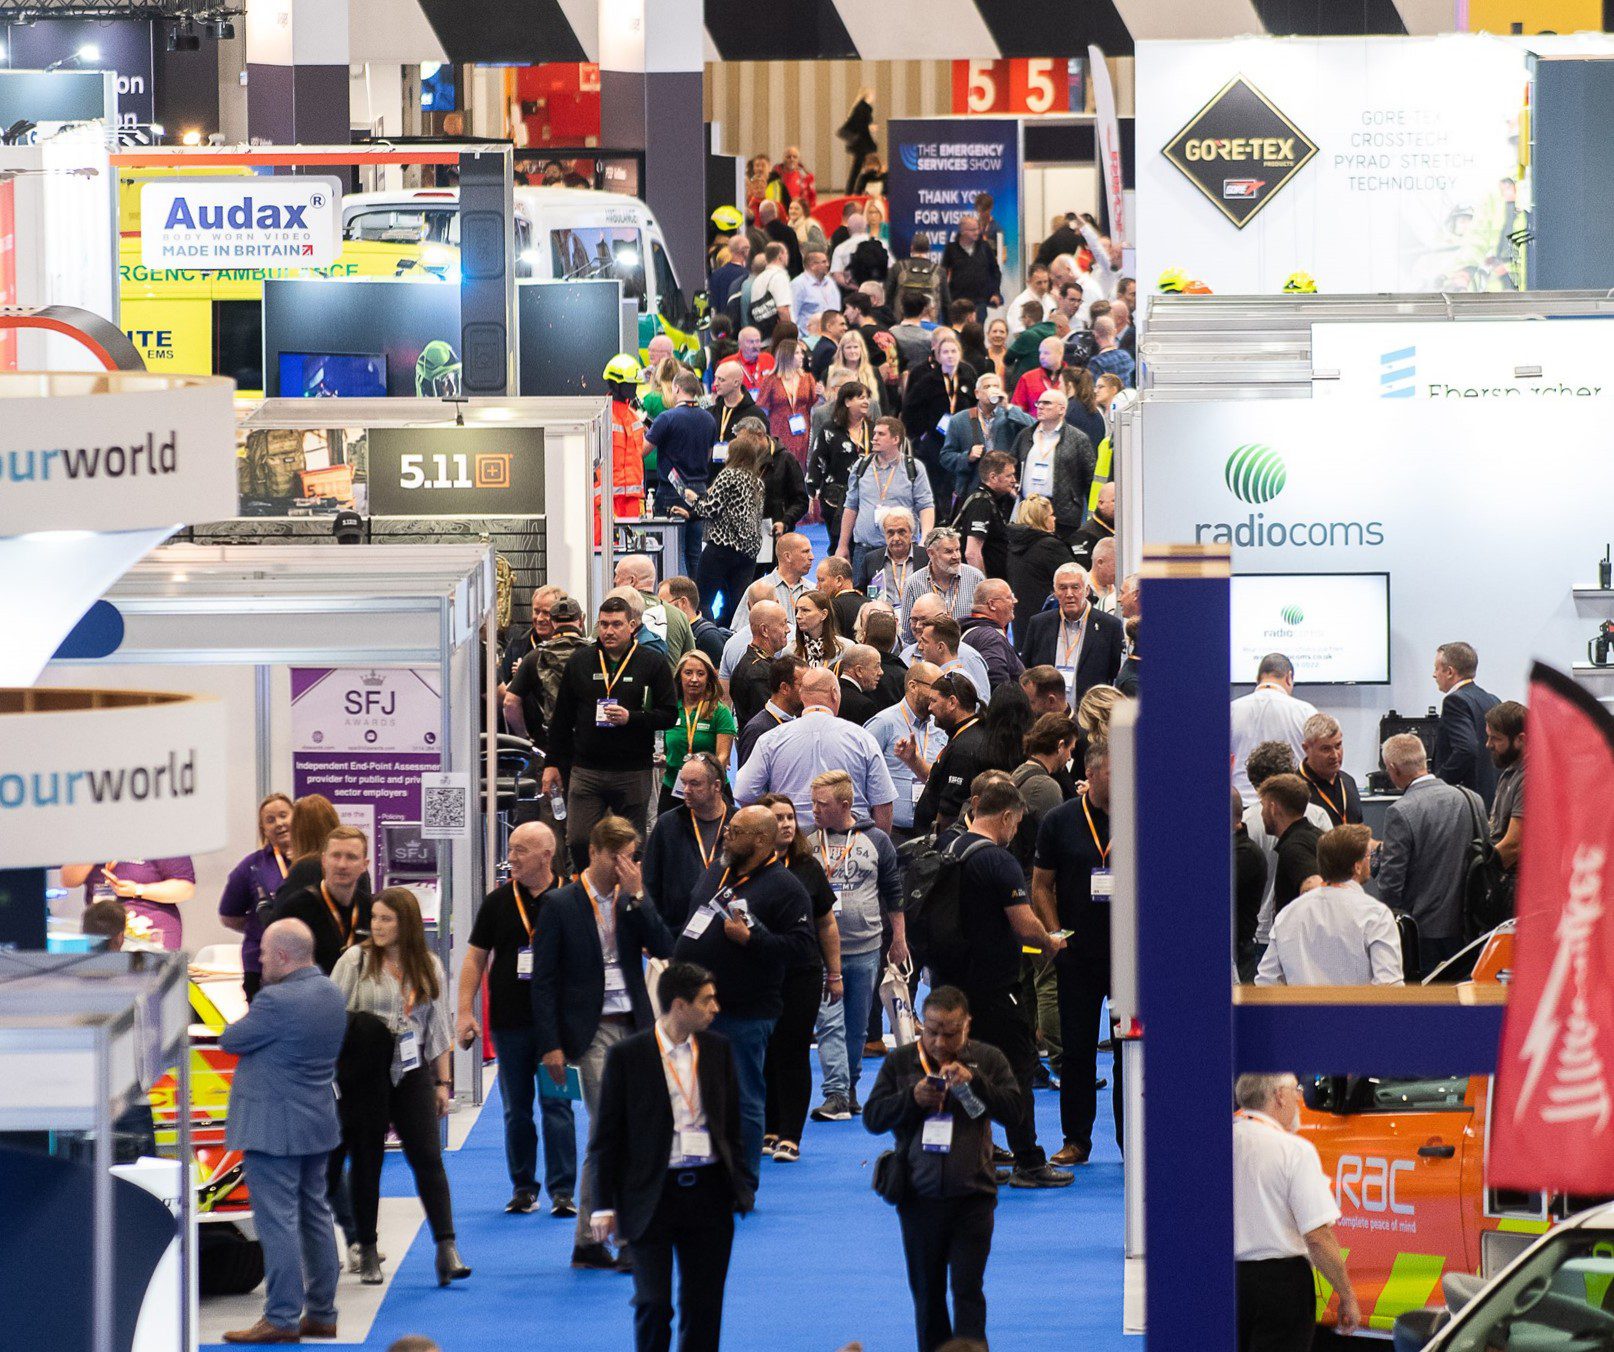 RECORD NUMBERS ATTEND EMERGENCY SERVICES SHOW 2022